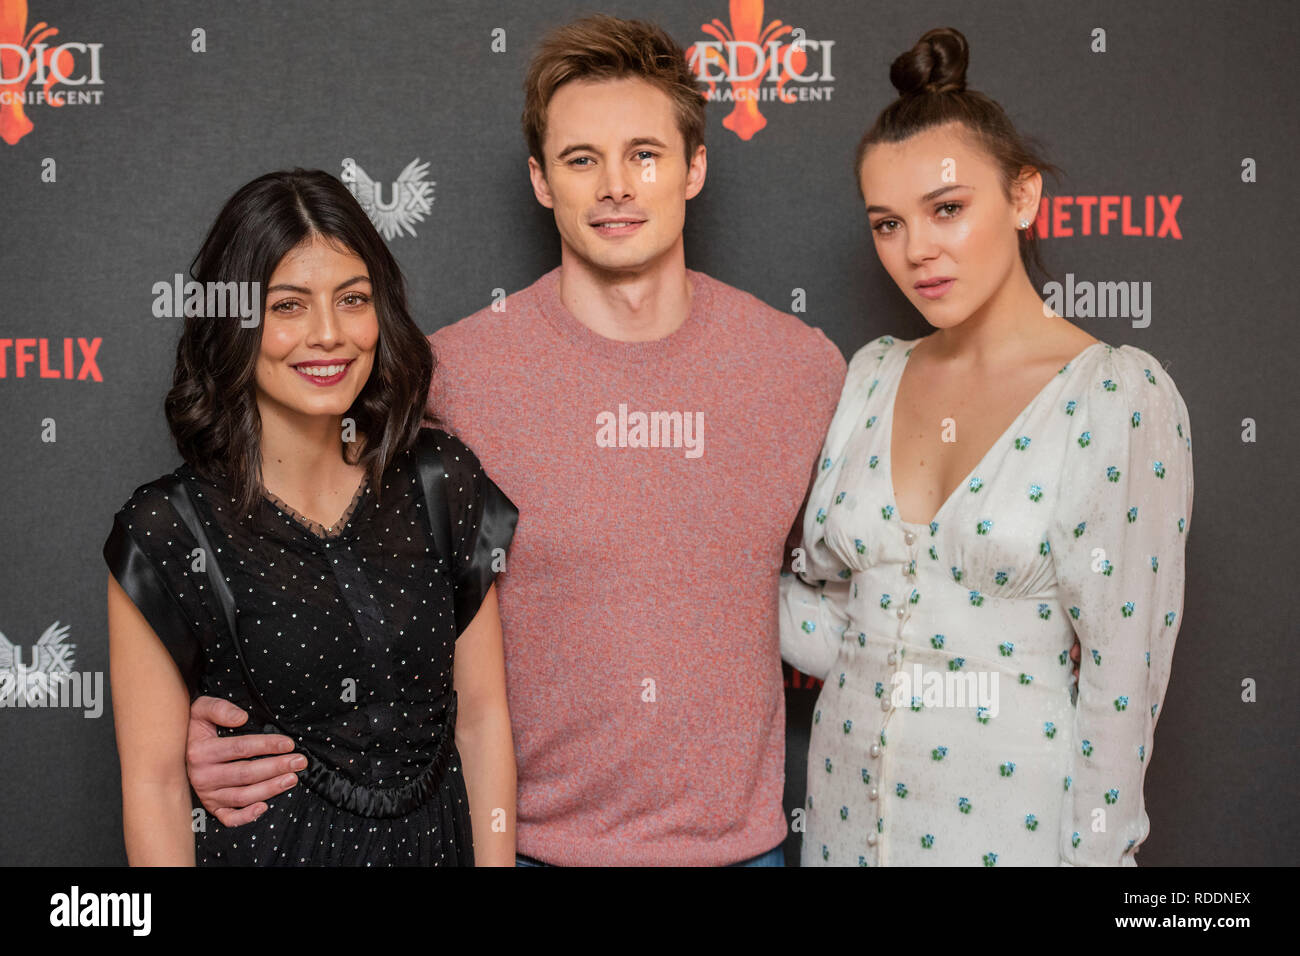 Soho, London, UK. 18th Jan 2019. Alessandra Mastronardi, Bradley James and Synnøve Karlsen - Medici: The Magnificent screening, a new series on Netflix produced by Lux - in the Soho Hotel. Credit: Guy Bell/Alamy Live News Stock Photo